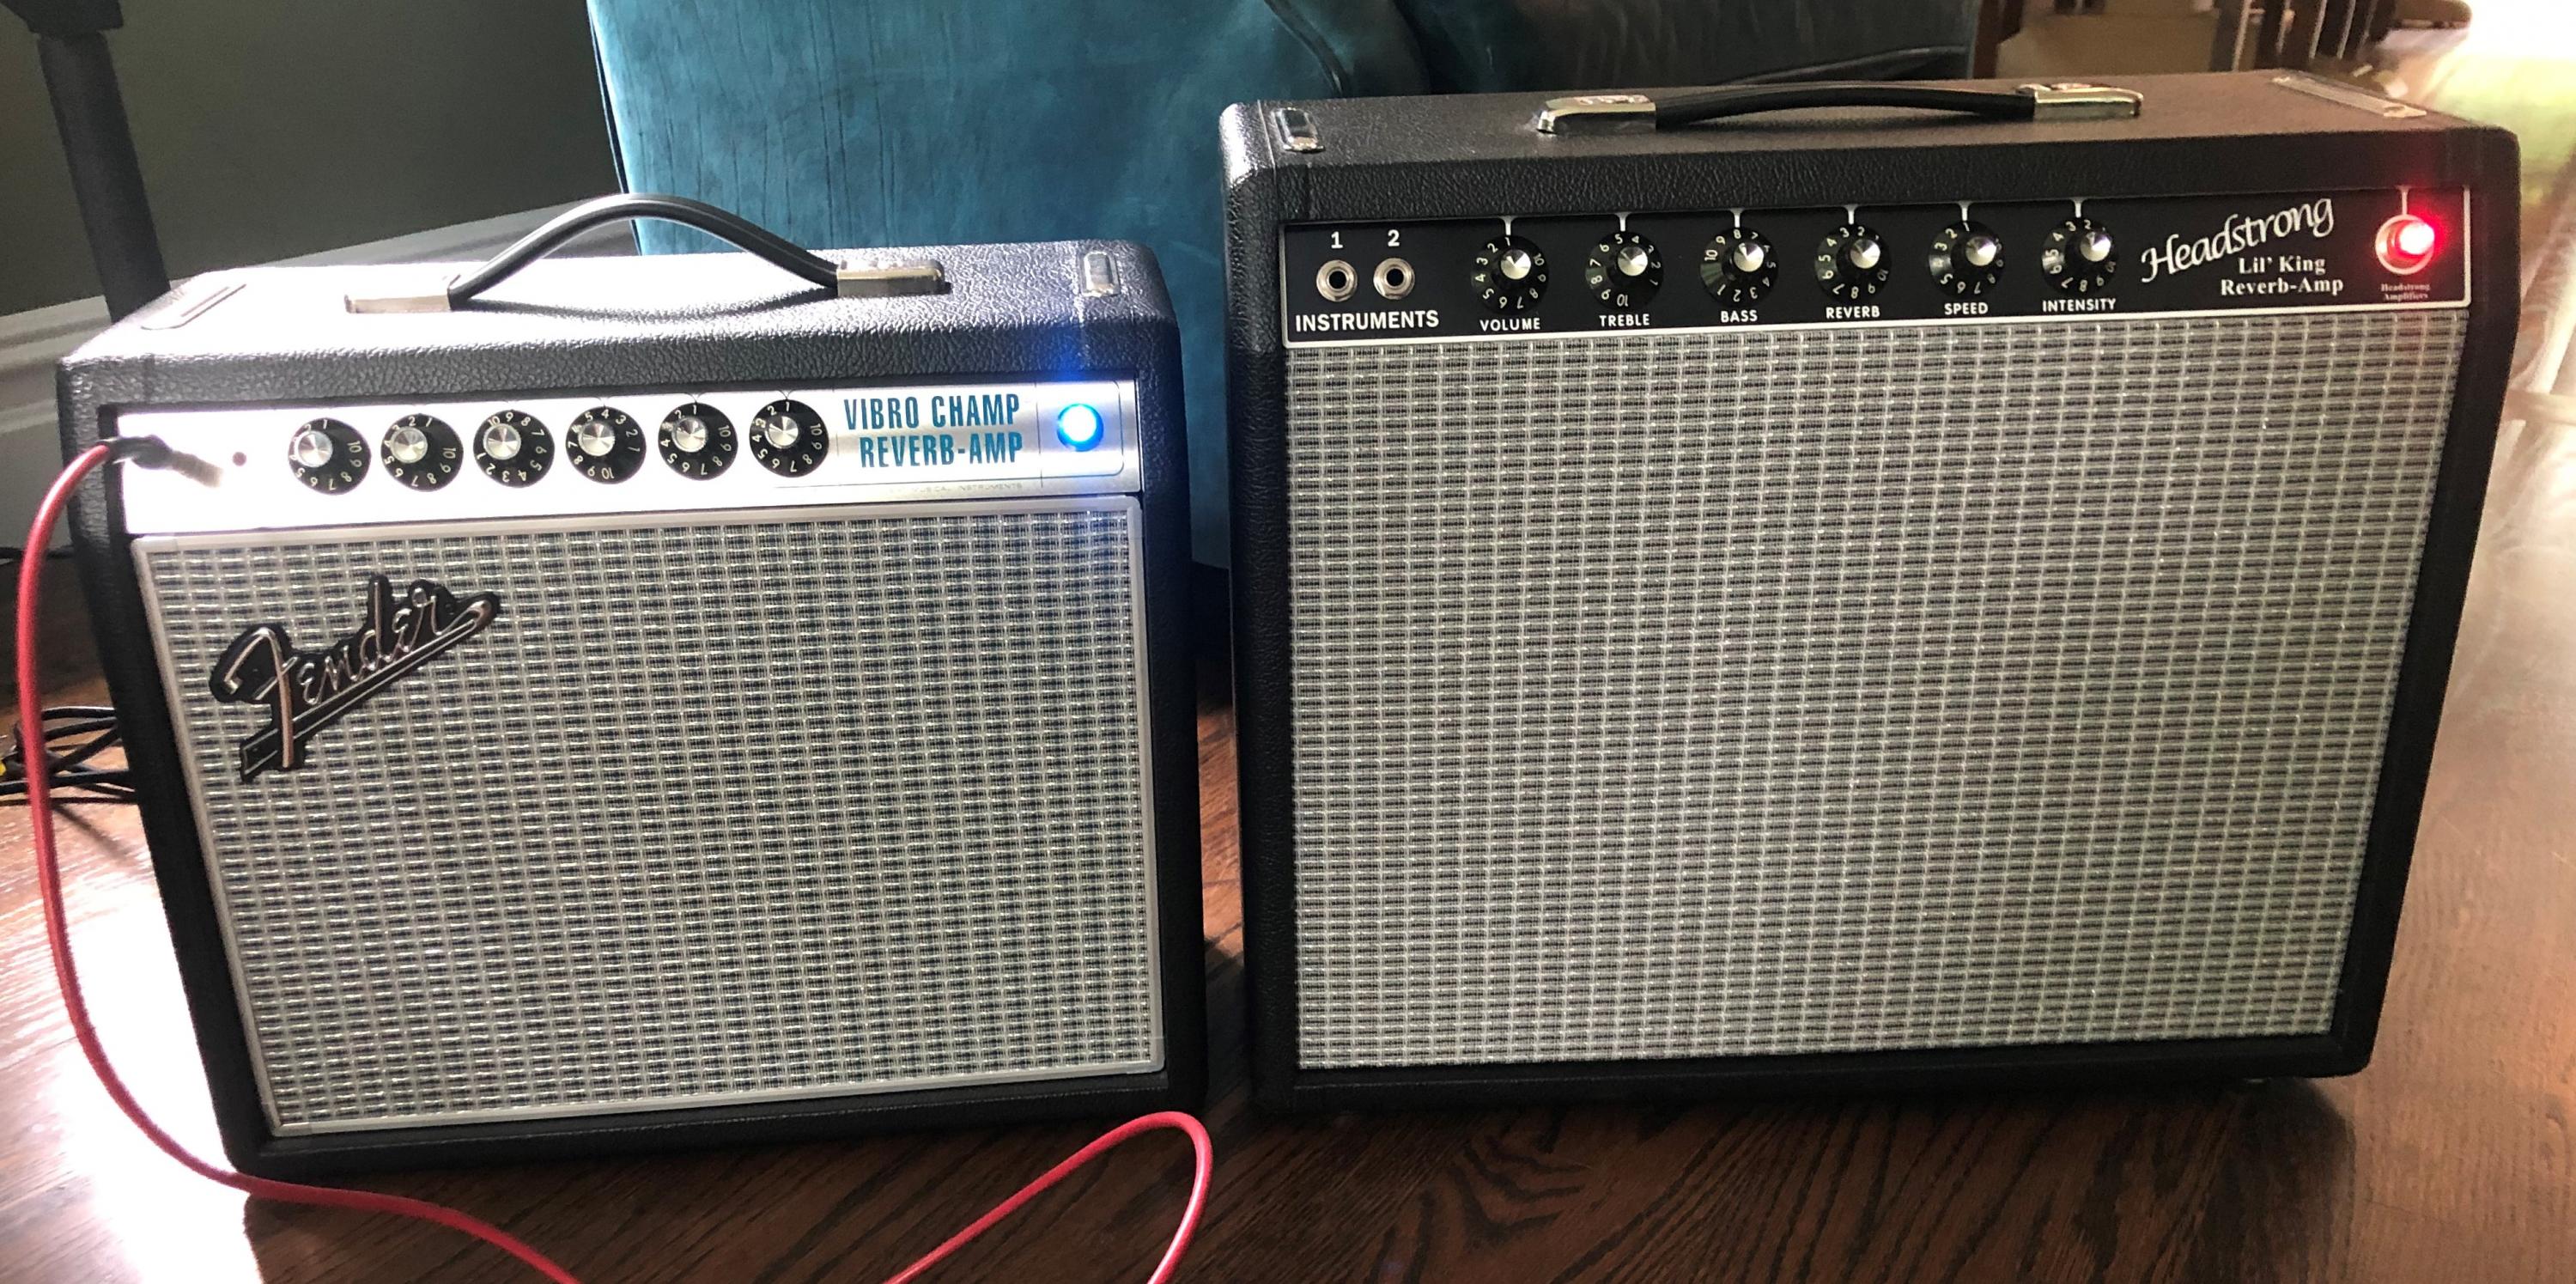 Some very cool new amps coming from Fender.-champ-lil-king-jpg